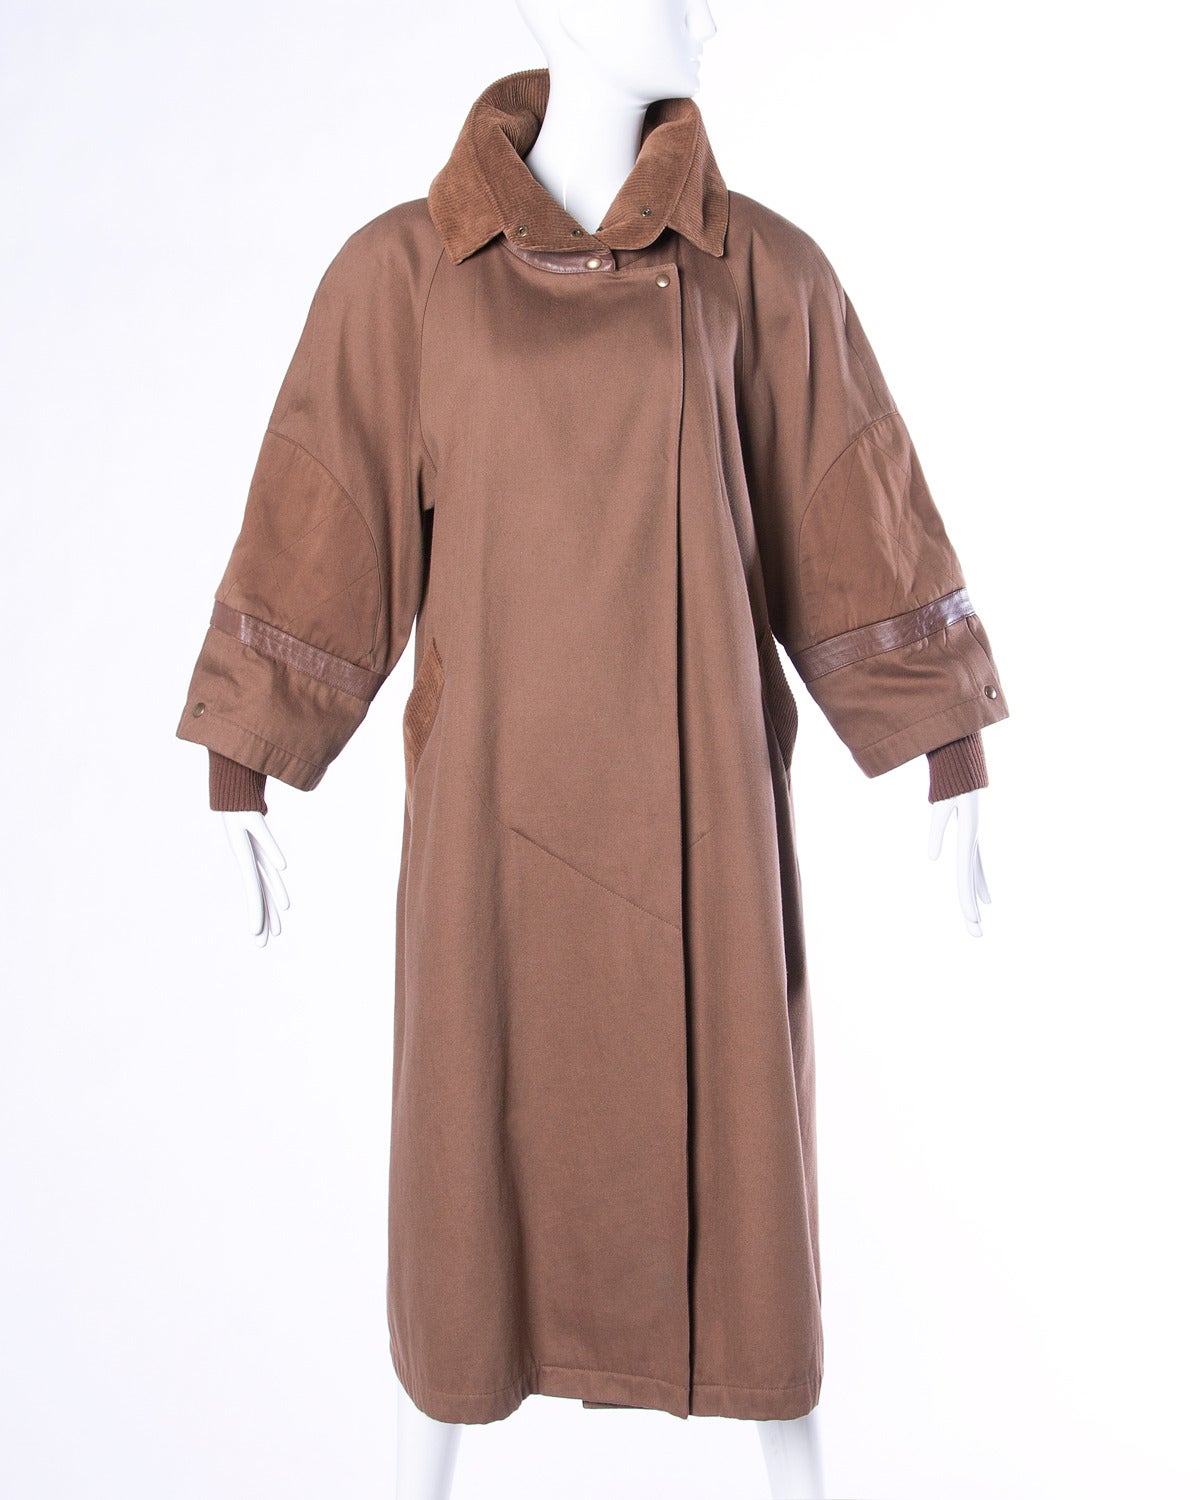 Reduced from $895. Unique avant garde coat by Claude Montana. Snap detail up the back of the coat and buttery leather trim with buckle detailing. Please see measurements below.

Details:

Partially Lined
Side Pockets
Front and Back Snap